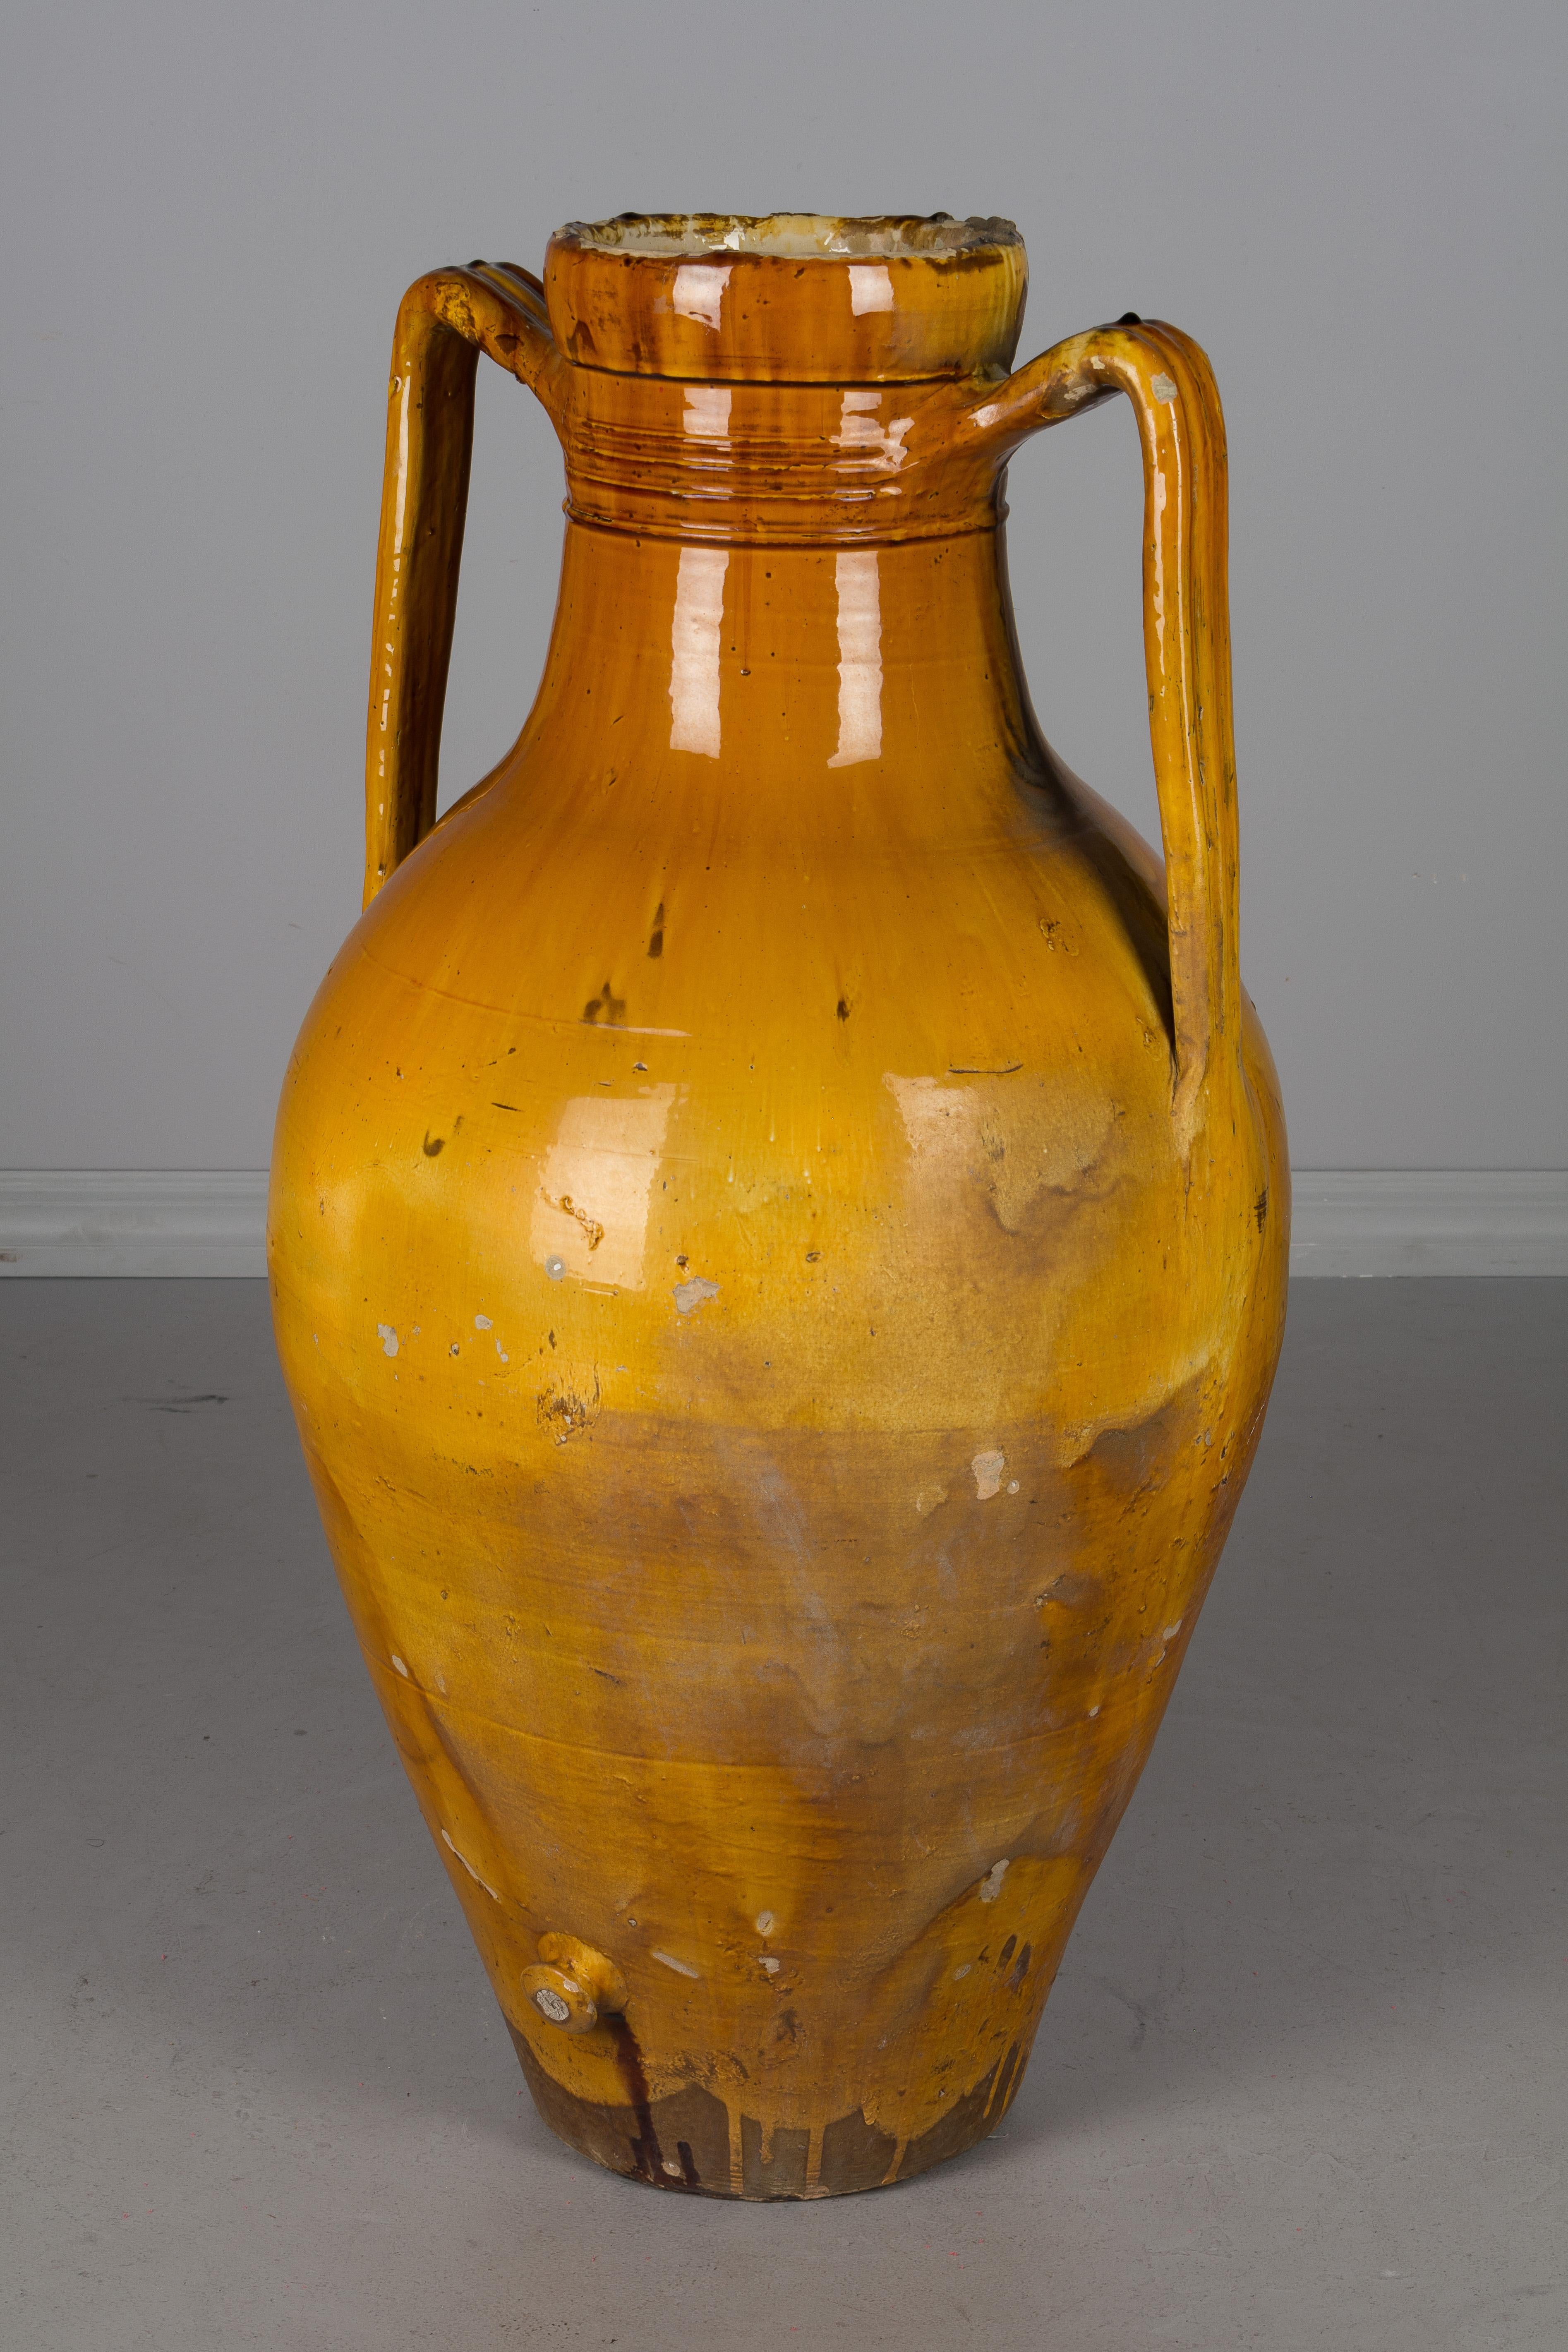 A large 19th century glazed terracotta two-handled pottery urn used for storing olive oil with a small corked spigot at the bottom. Bright yellow ochre glaze. From the Apulia region of Southern Italy. A nice sculptural element for the garden or